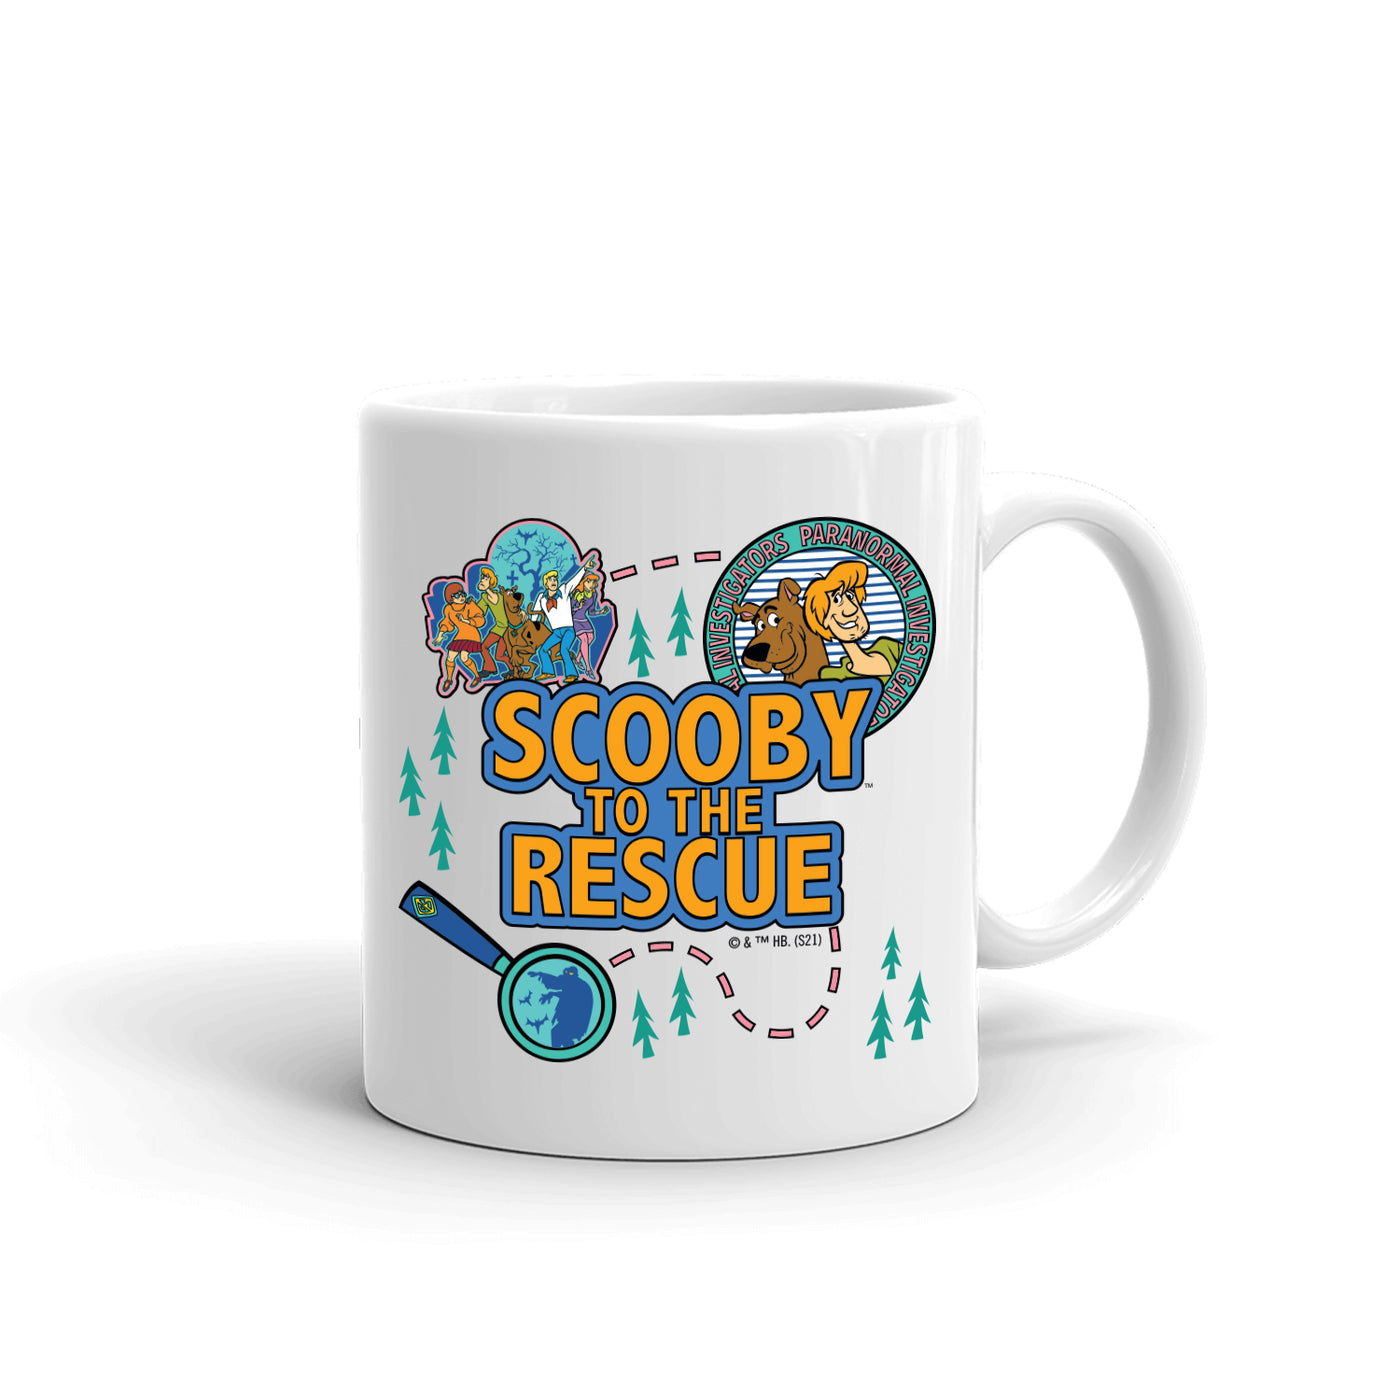 Scooby-Doo Scooby to the Rescue White Mug